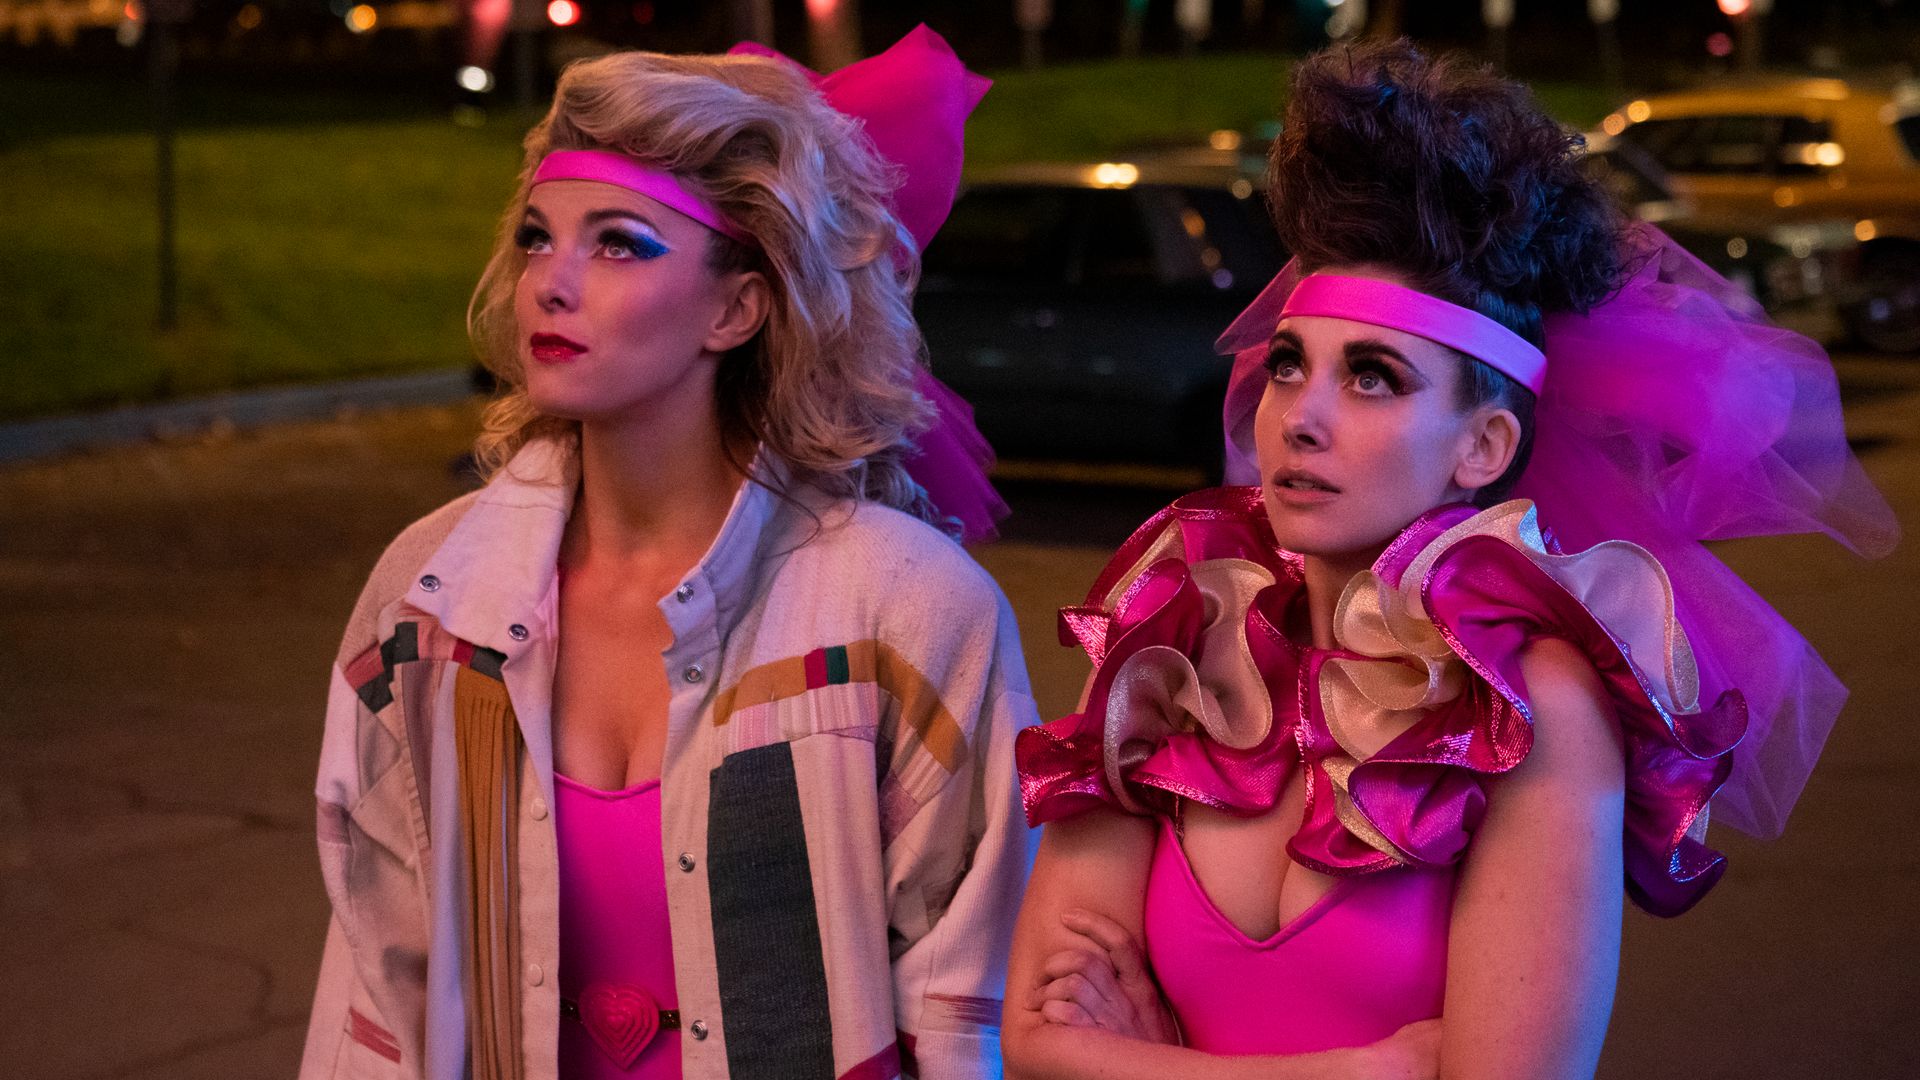 GLOW was cancelled after 3 seasons